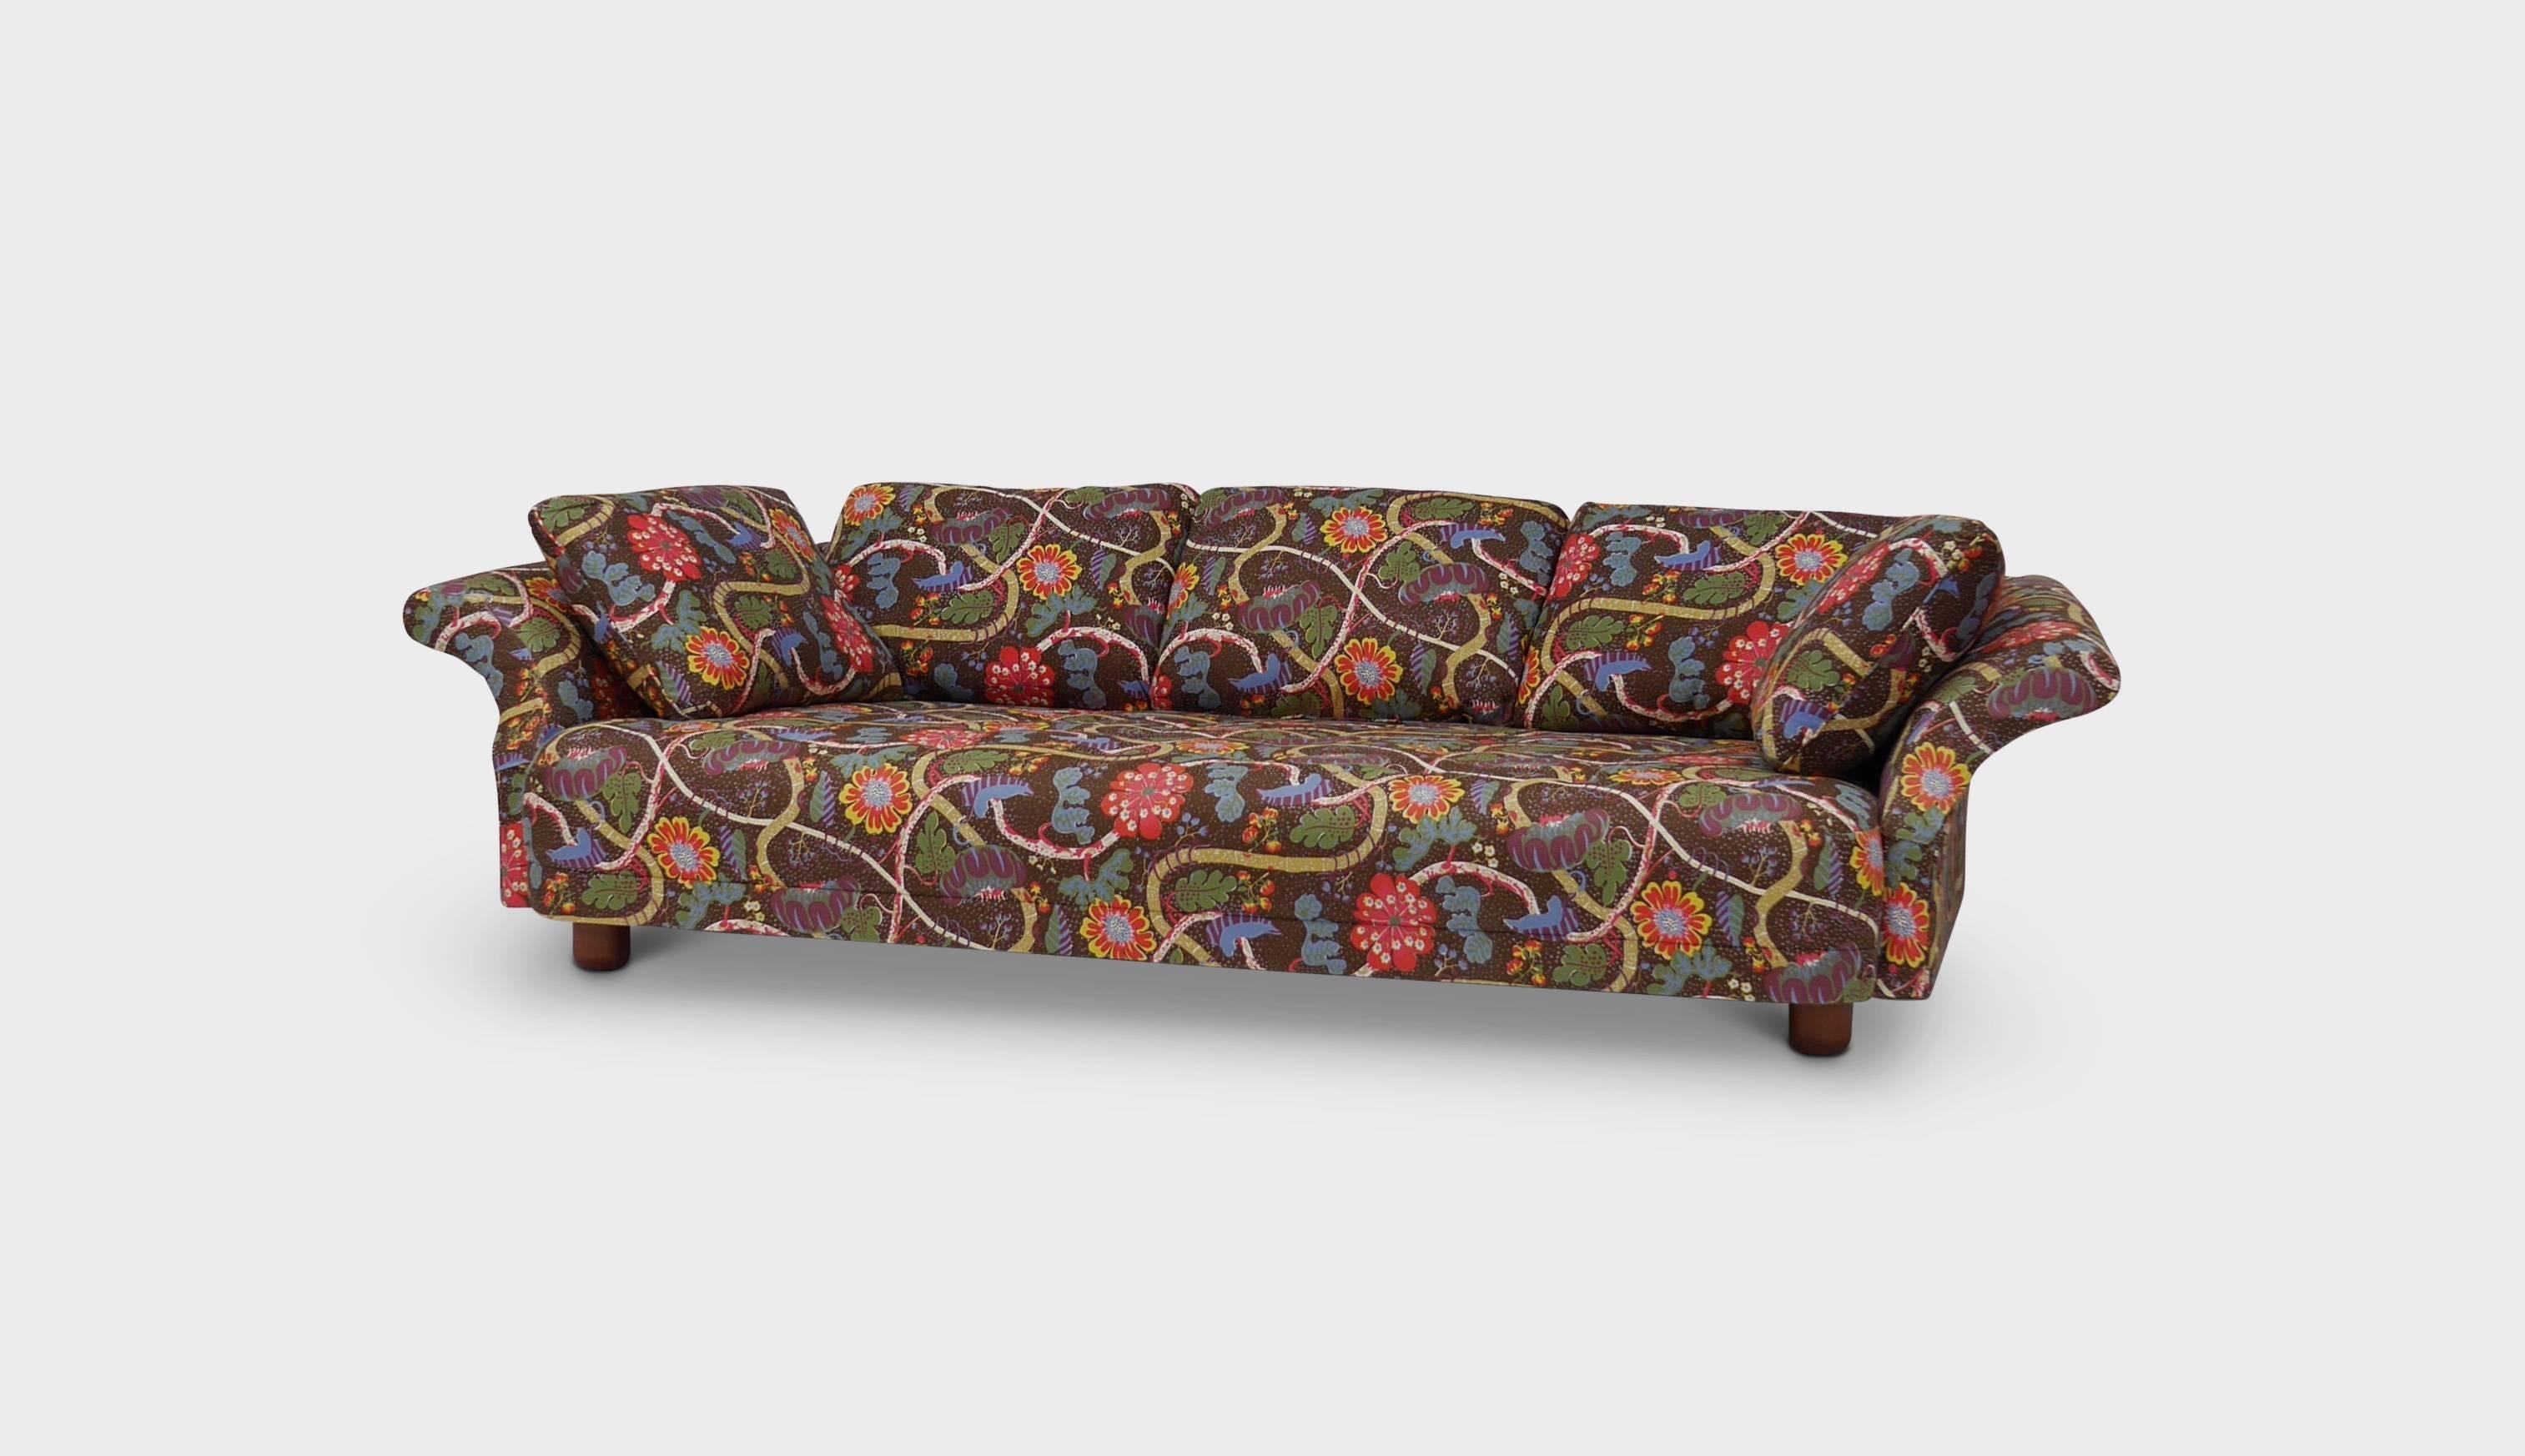 The Liljevalch sofa from 1934 was the first piece of furniture that Josef Frank designed for Svenskt Tenn. It was shown for the first time at the Liljevalch Art Gallery in Stockholm and hence the name “Liljevalch Sofa”. In a letter to Estrid Ericson